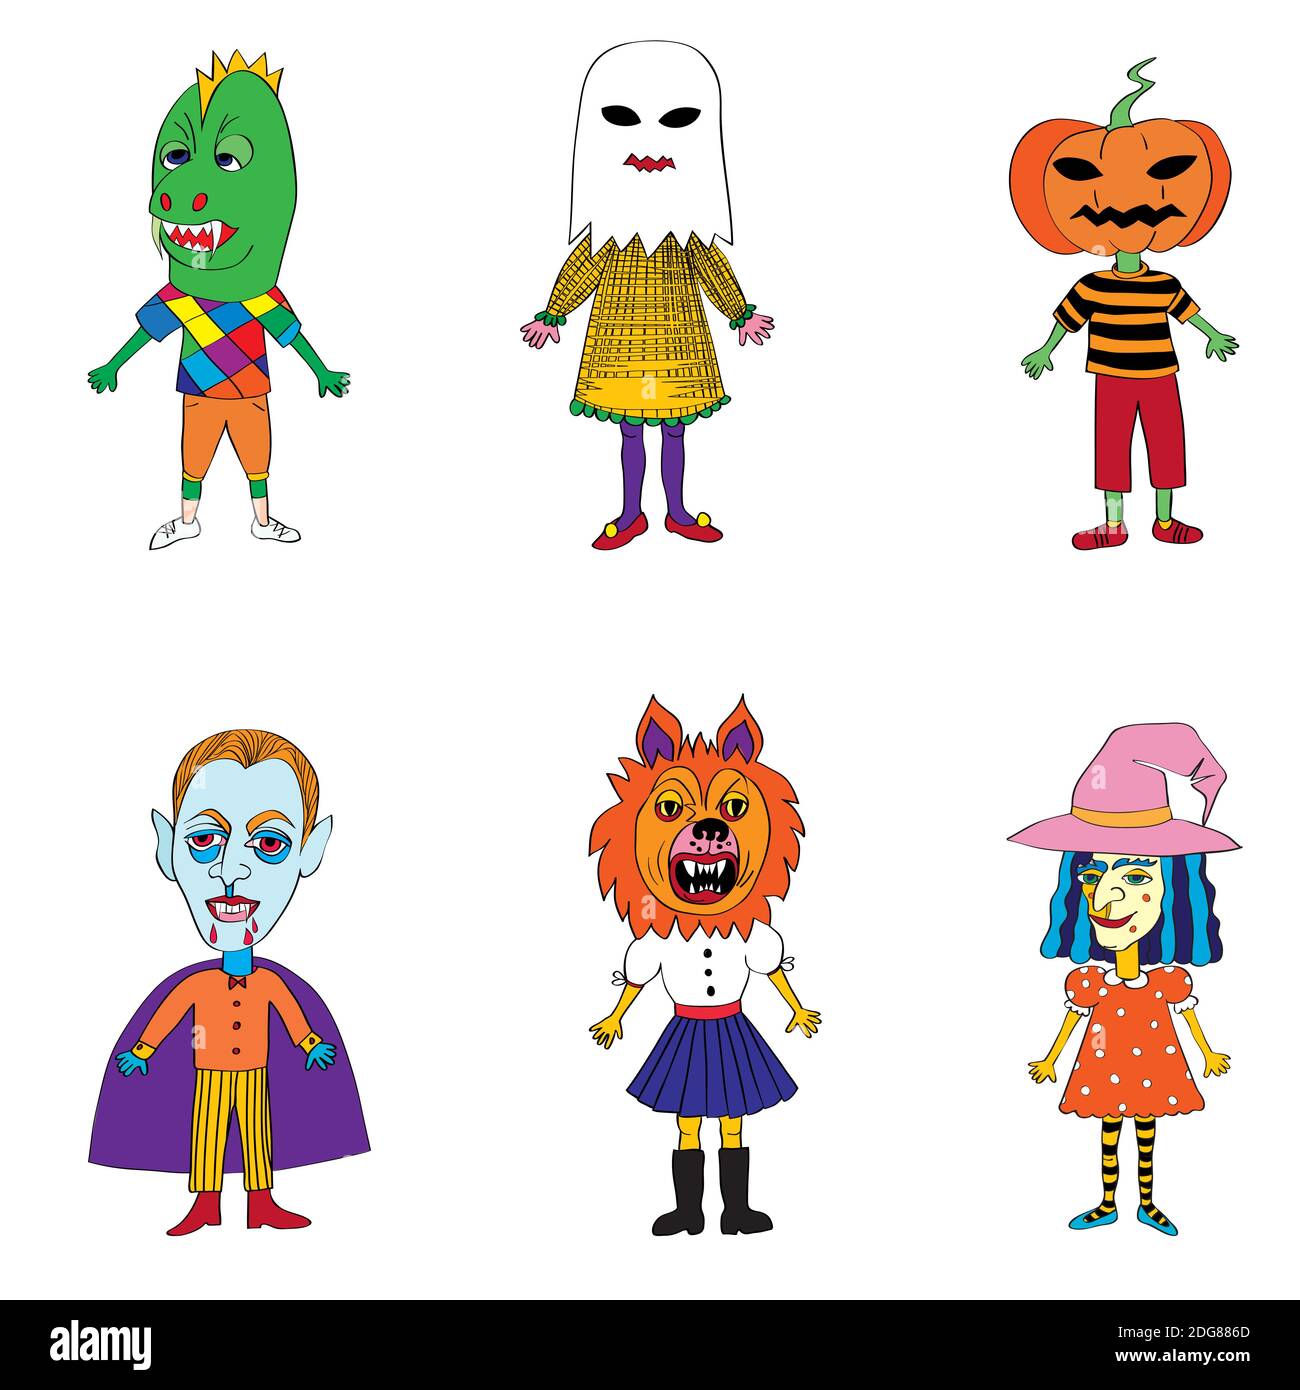 Helloween costumes drawings Stock Photo